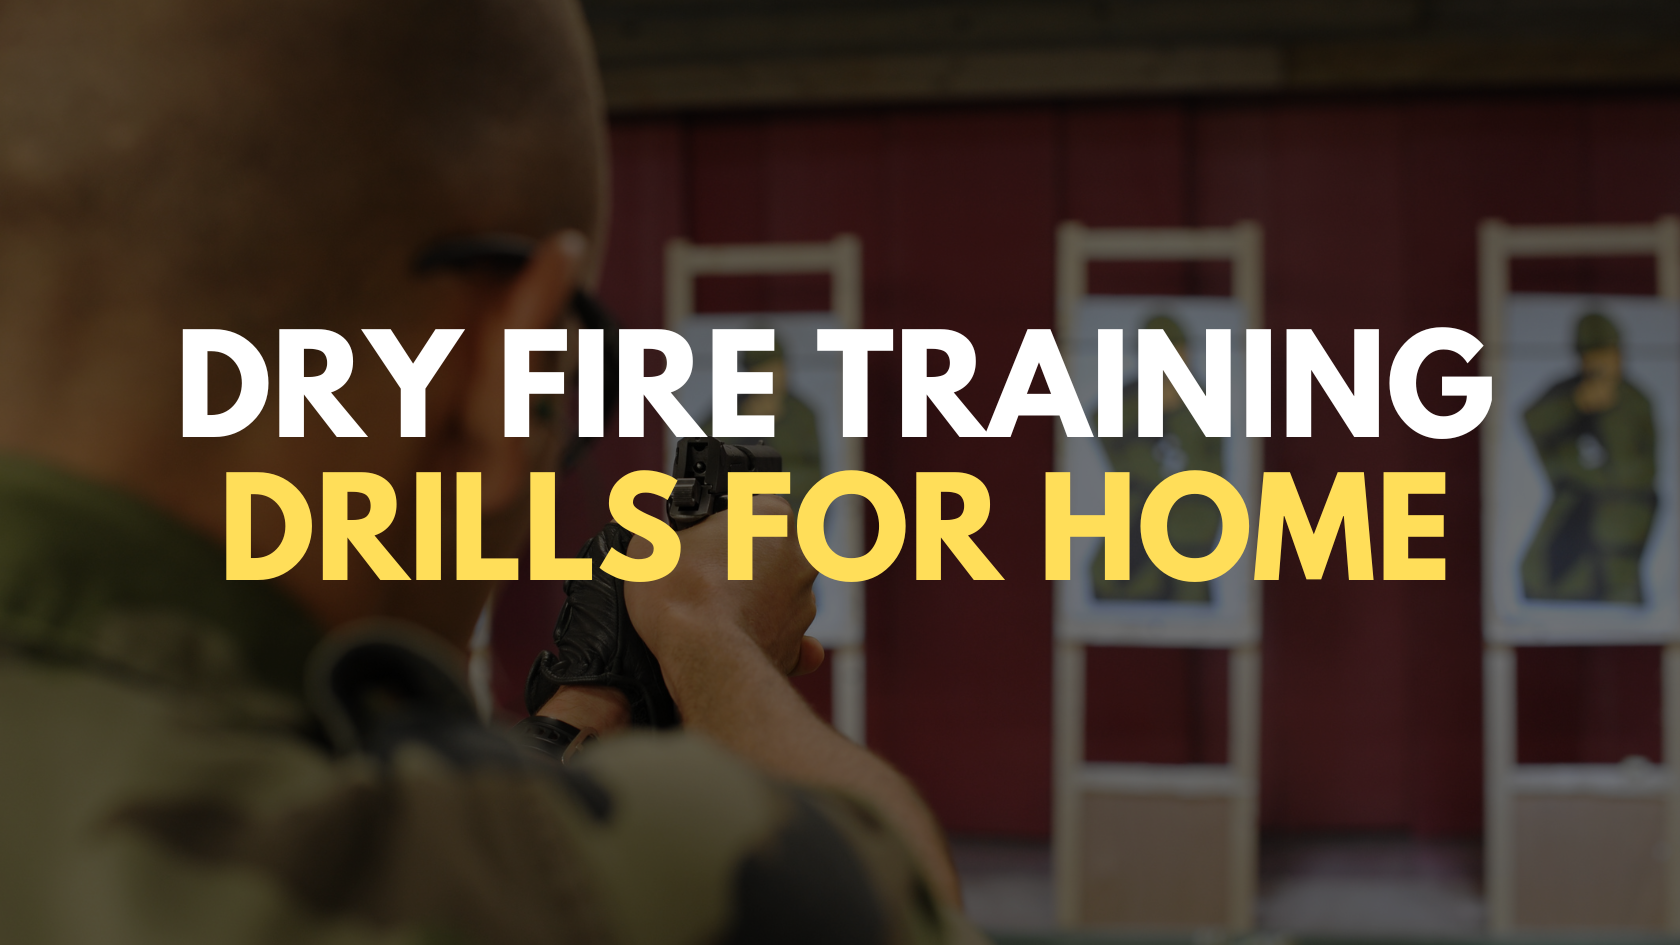 Dry Fire Training Drills for Home